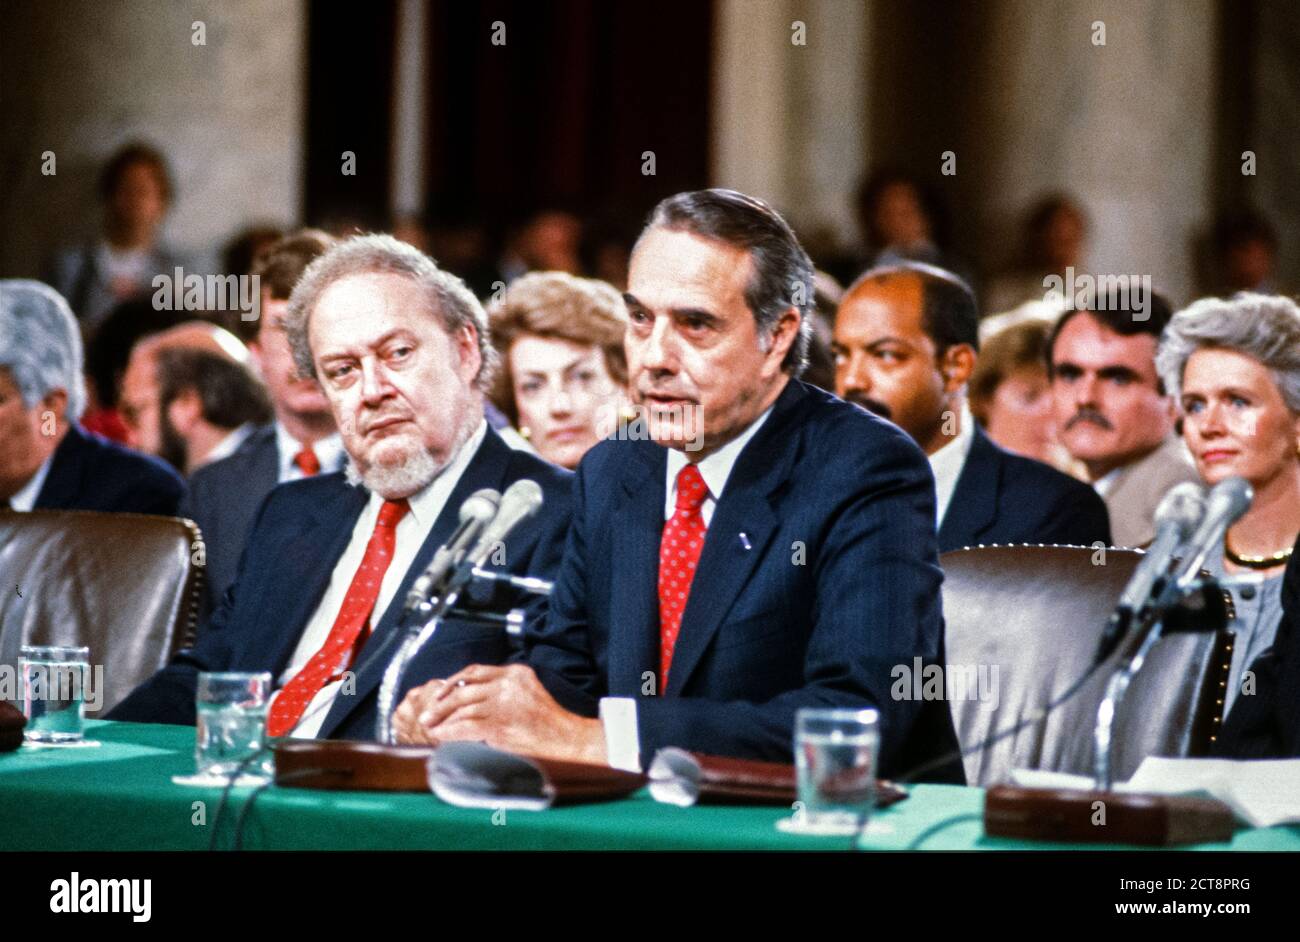 United States Senate Minority Leader Bob Dole (Republican of Kansas), right, introduces Judge Robert Bork, left, during the US Senate Committee on the Judiciary confirmation hearing on Bork’s nomination by US President Ronald Reagan, as Associate Justice of the Supreme Court to succeed Justice Lewis Powell, who is retiring, in Washington, DC on September 15, 1987.Credit: Arnie Sachs / CNP /MediaPunch Stock Photo